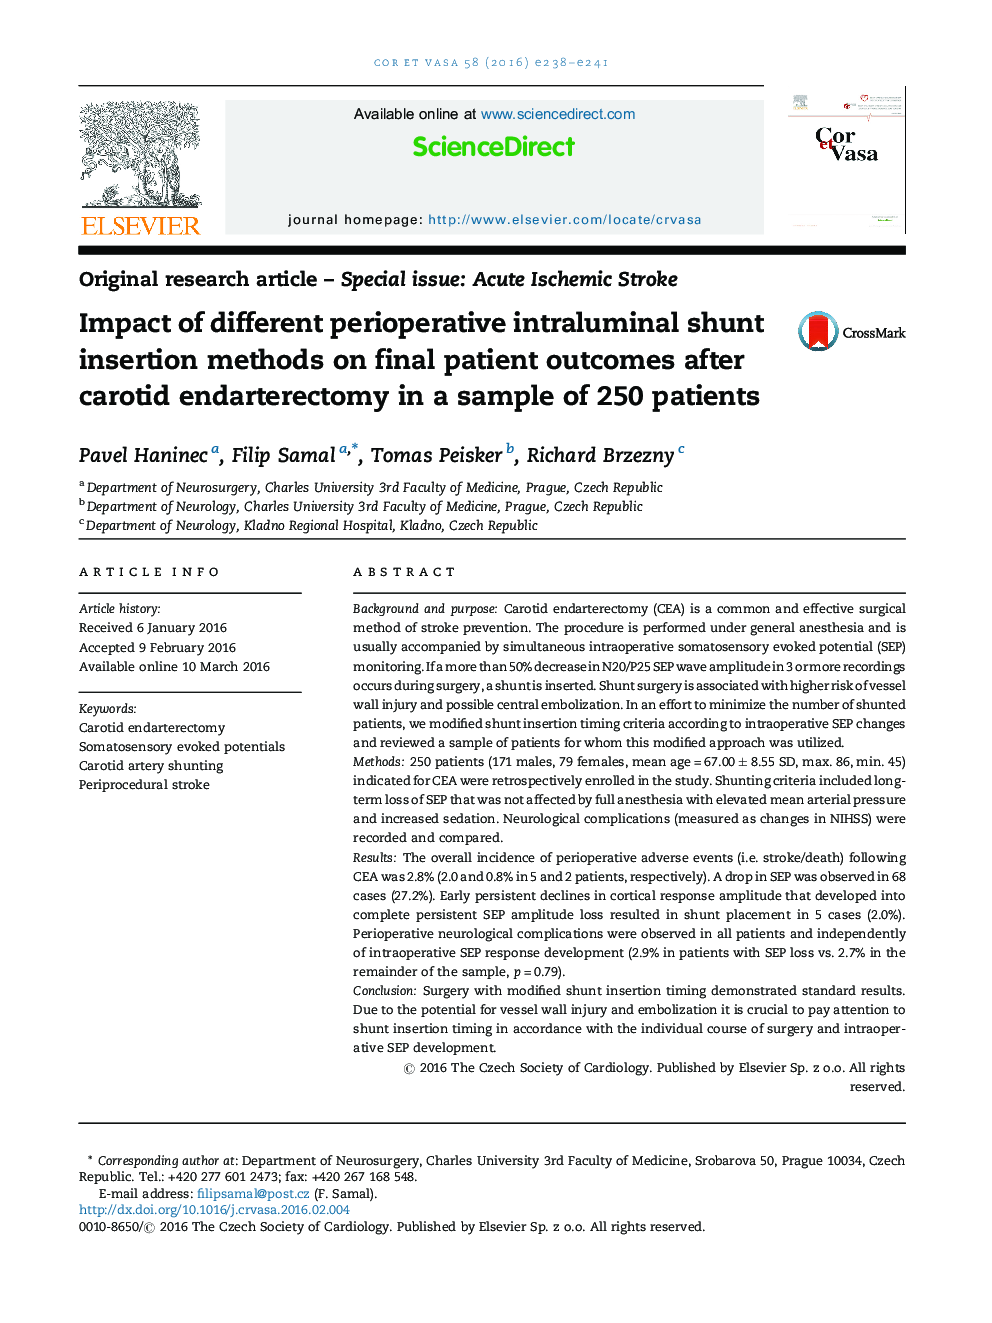 Impact of different perioperative intraluminal shunt insertion methods on final patient outcomes after carotid endarterectomy in a sample of 250 patients